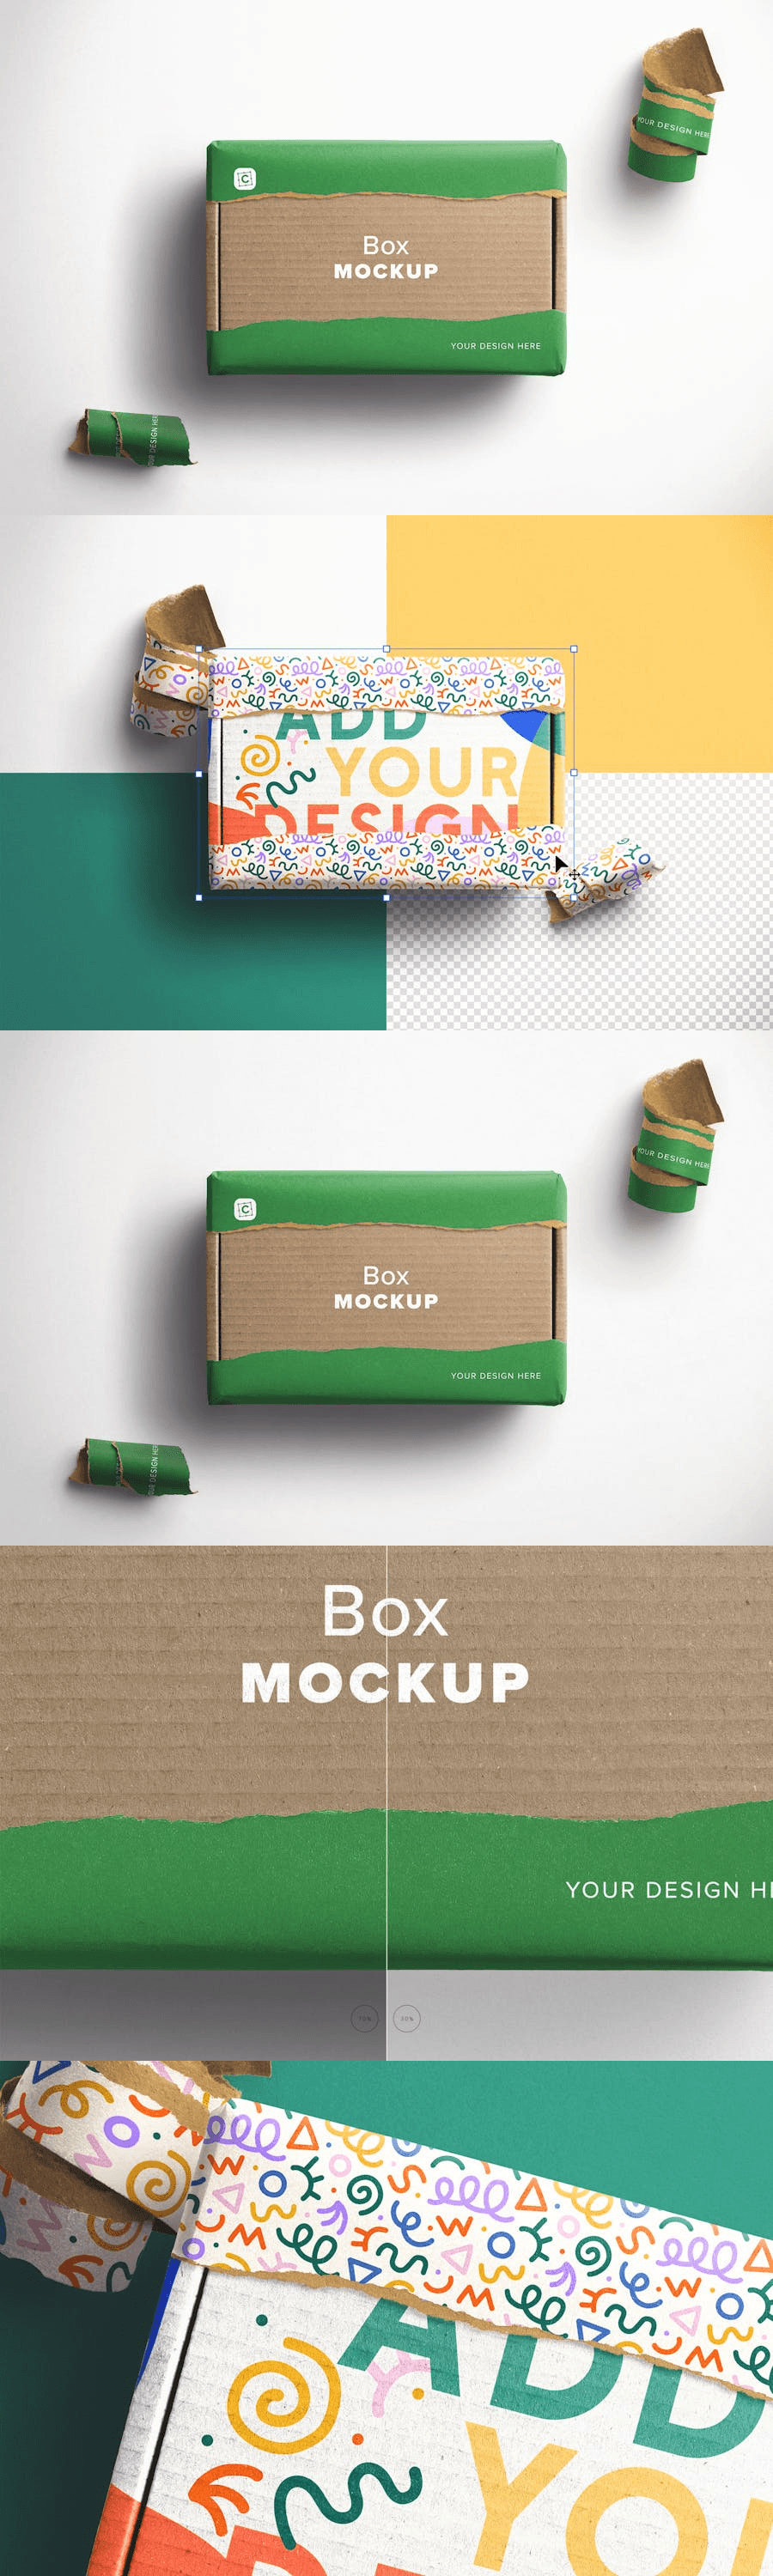 gift box box box design product package psd download template Mockup new